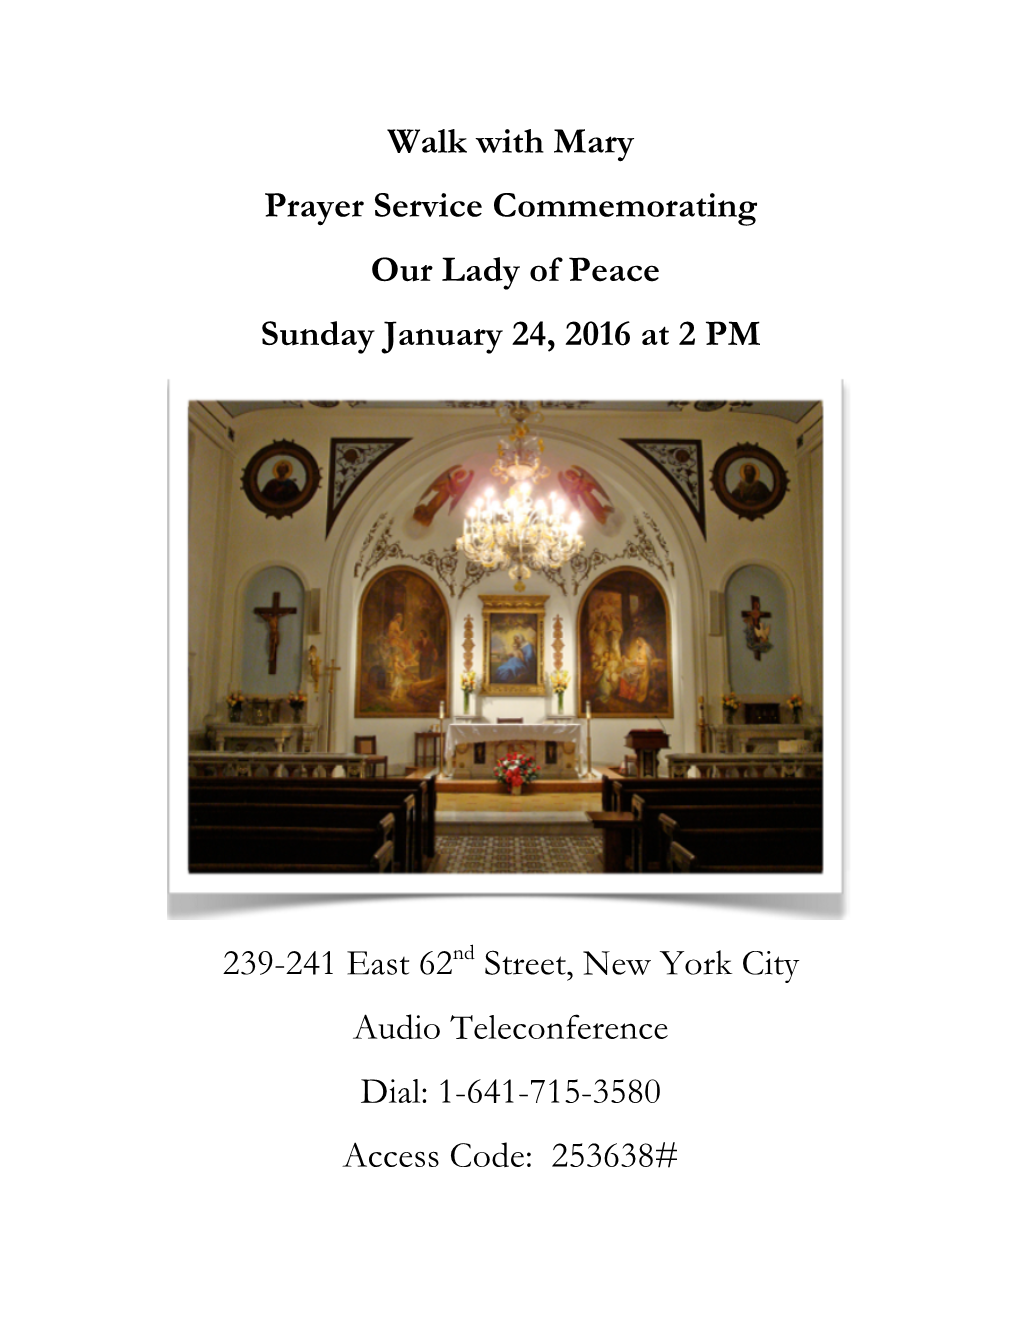 Prayer Service for Our Lady of Peace